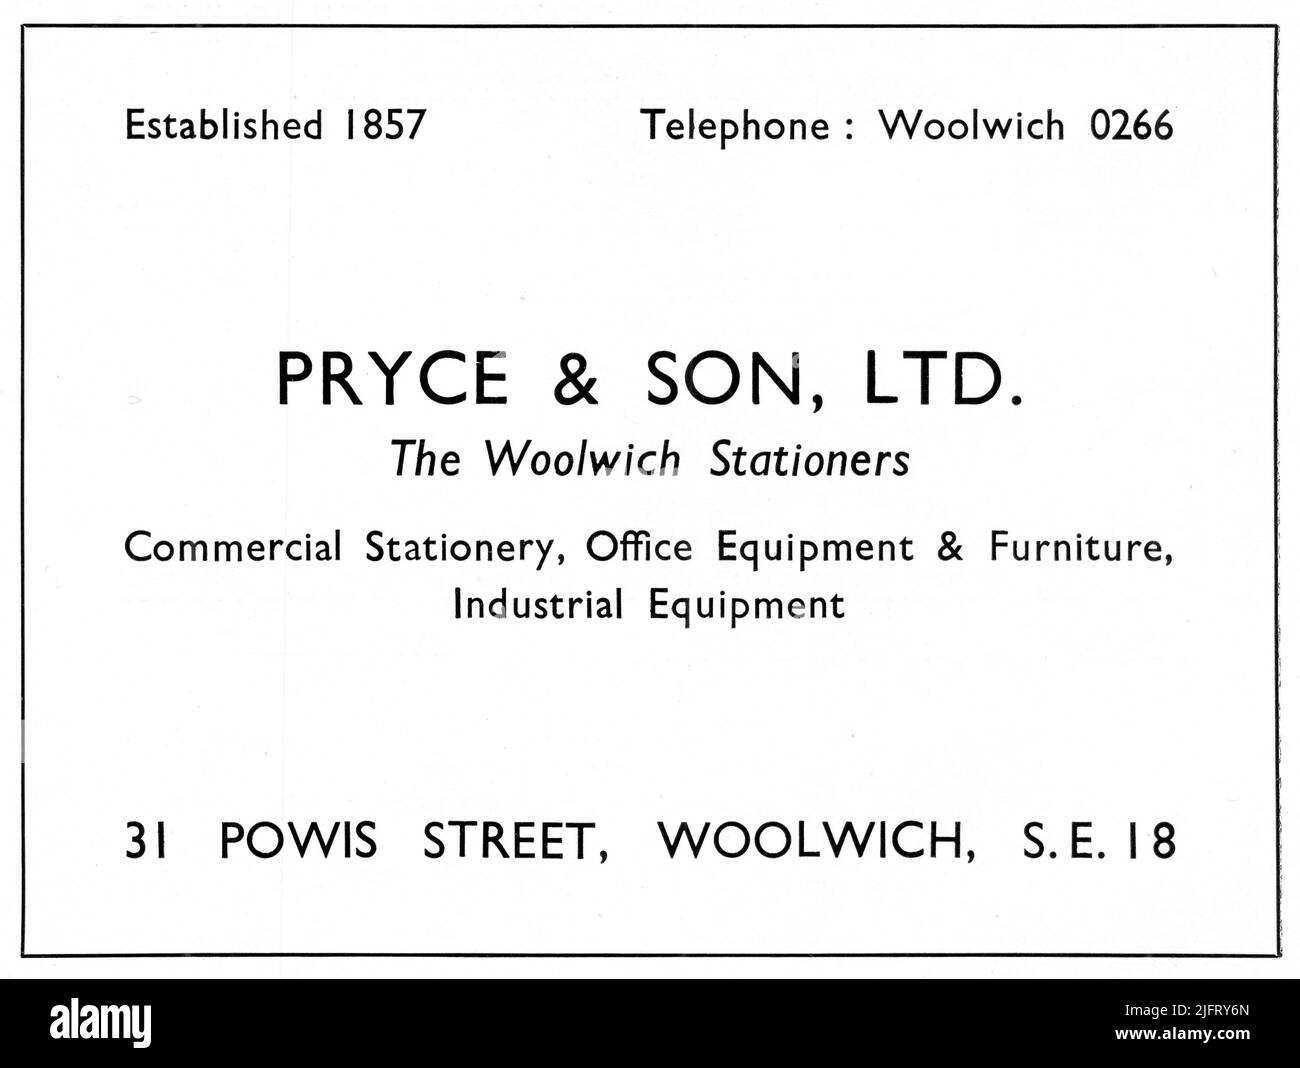 A 1951 advertisement by Pryce & Son Ltd., Stationers of 31 Powis Street, Woolwich, London. SE.18. Established in 1857, the company specialised in the supply of commercial stationery, office equipment & furniture and industrial equipment. Stock Photo